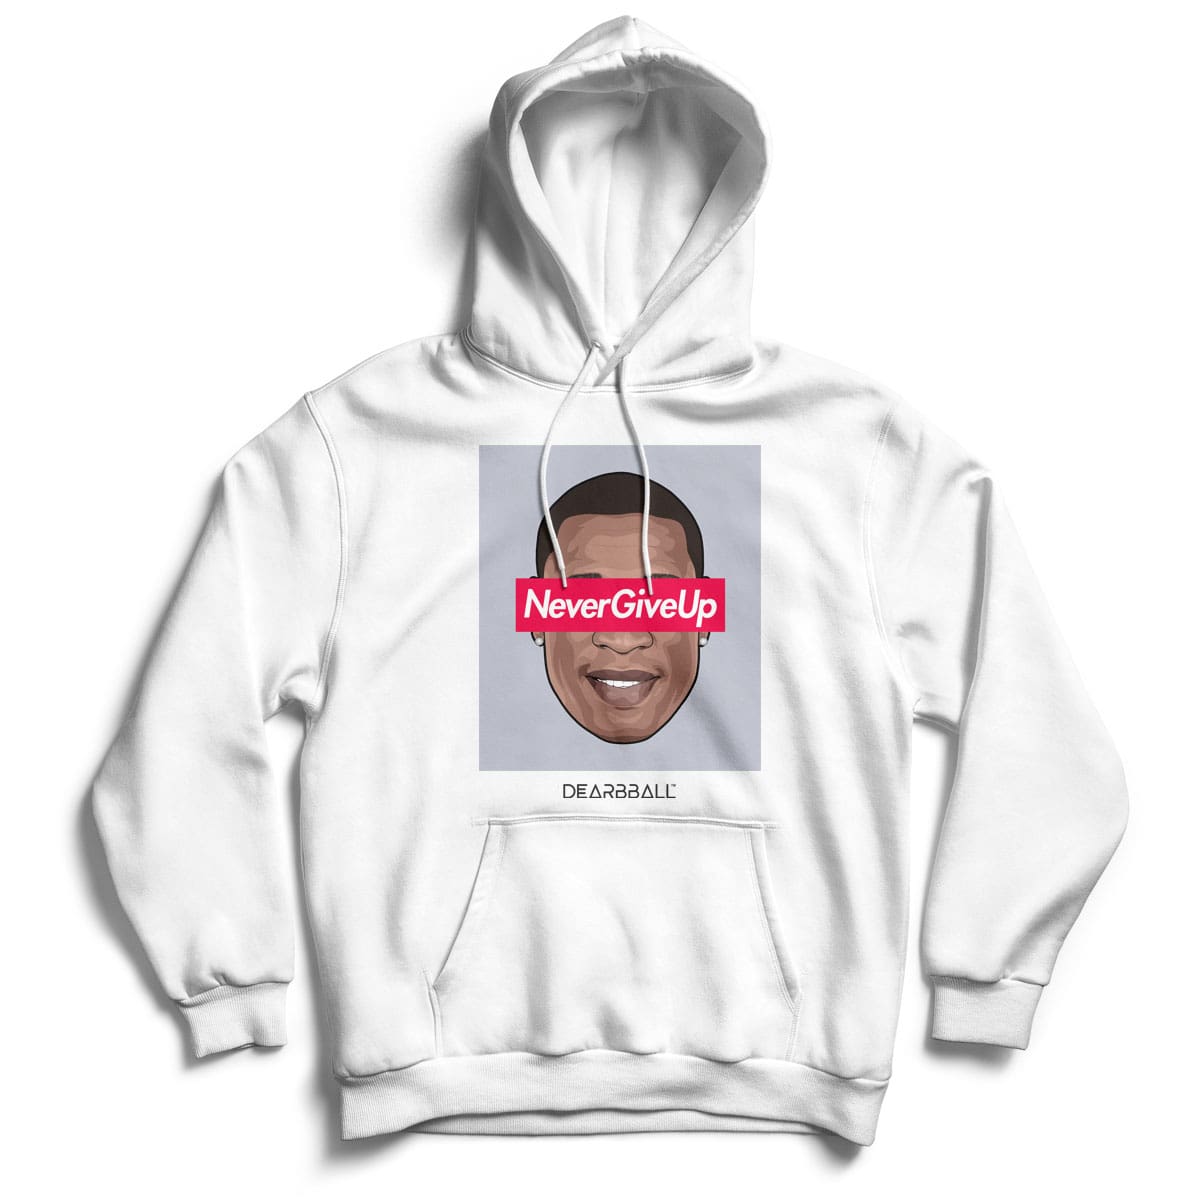 DearBBall Hoodie - Never Give Up Edition